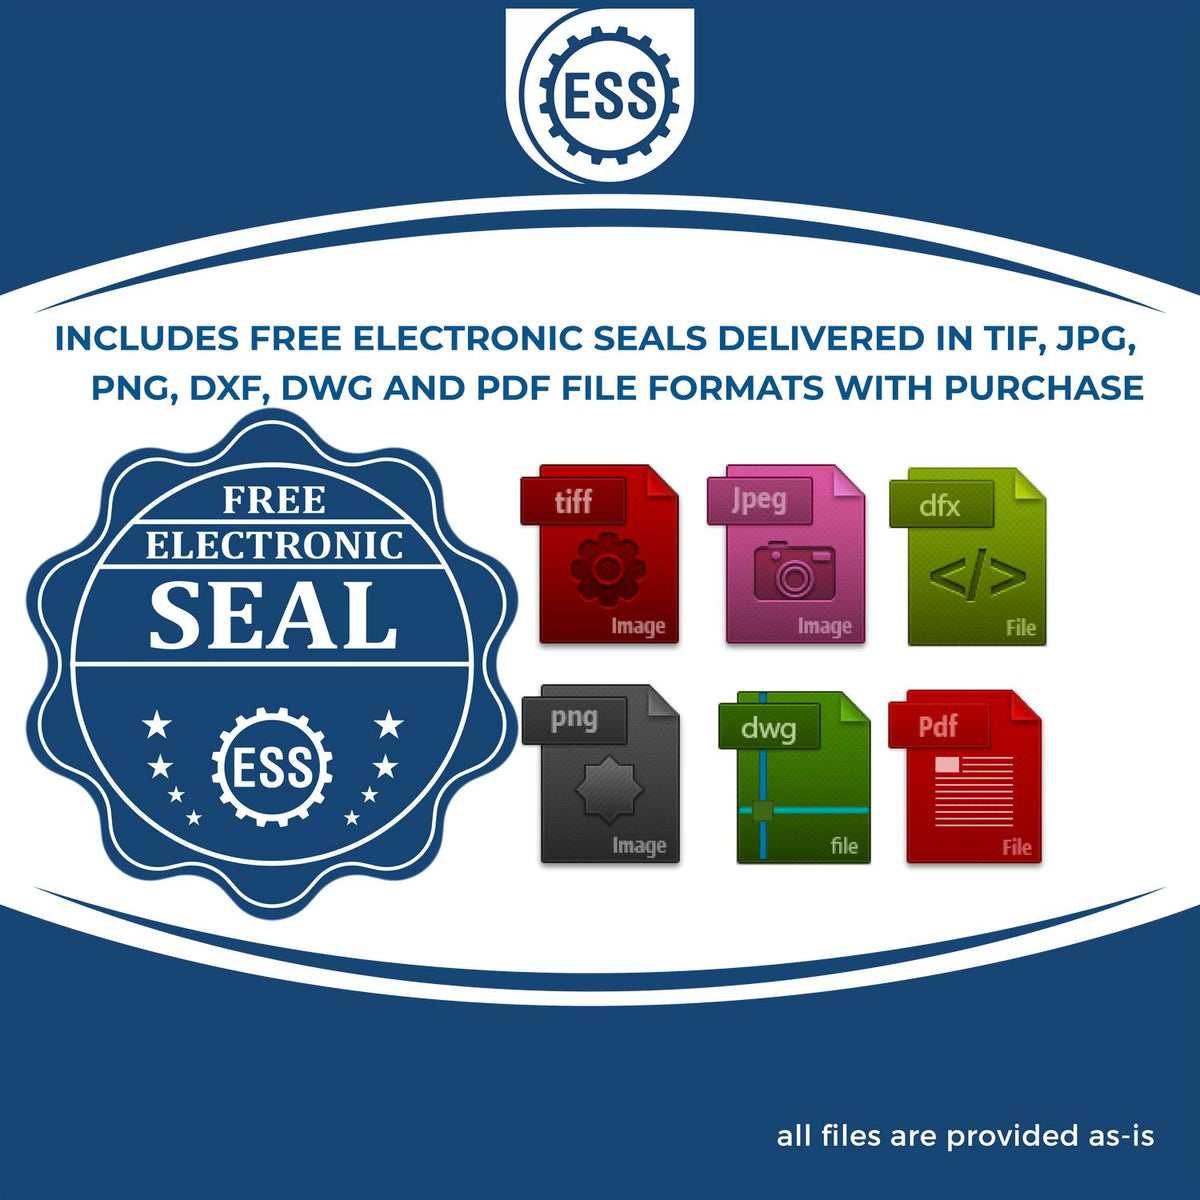 An infographic for the free electronic seal for the Gift Indiana Landscape Architect Seal illustrating the different file type icons such as DXF, DWG, TIF, JPG and PNG.